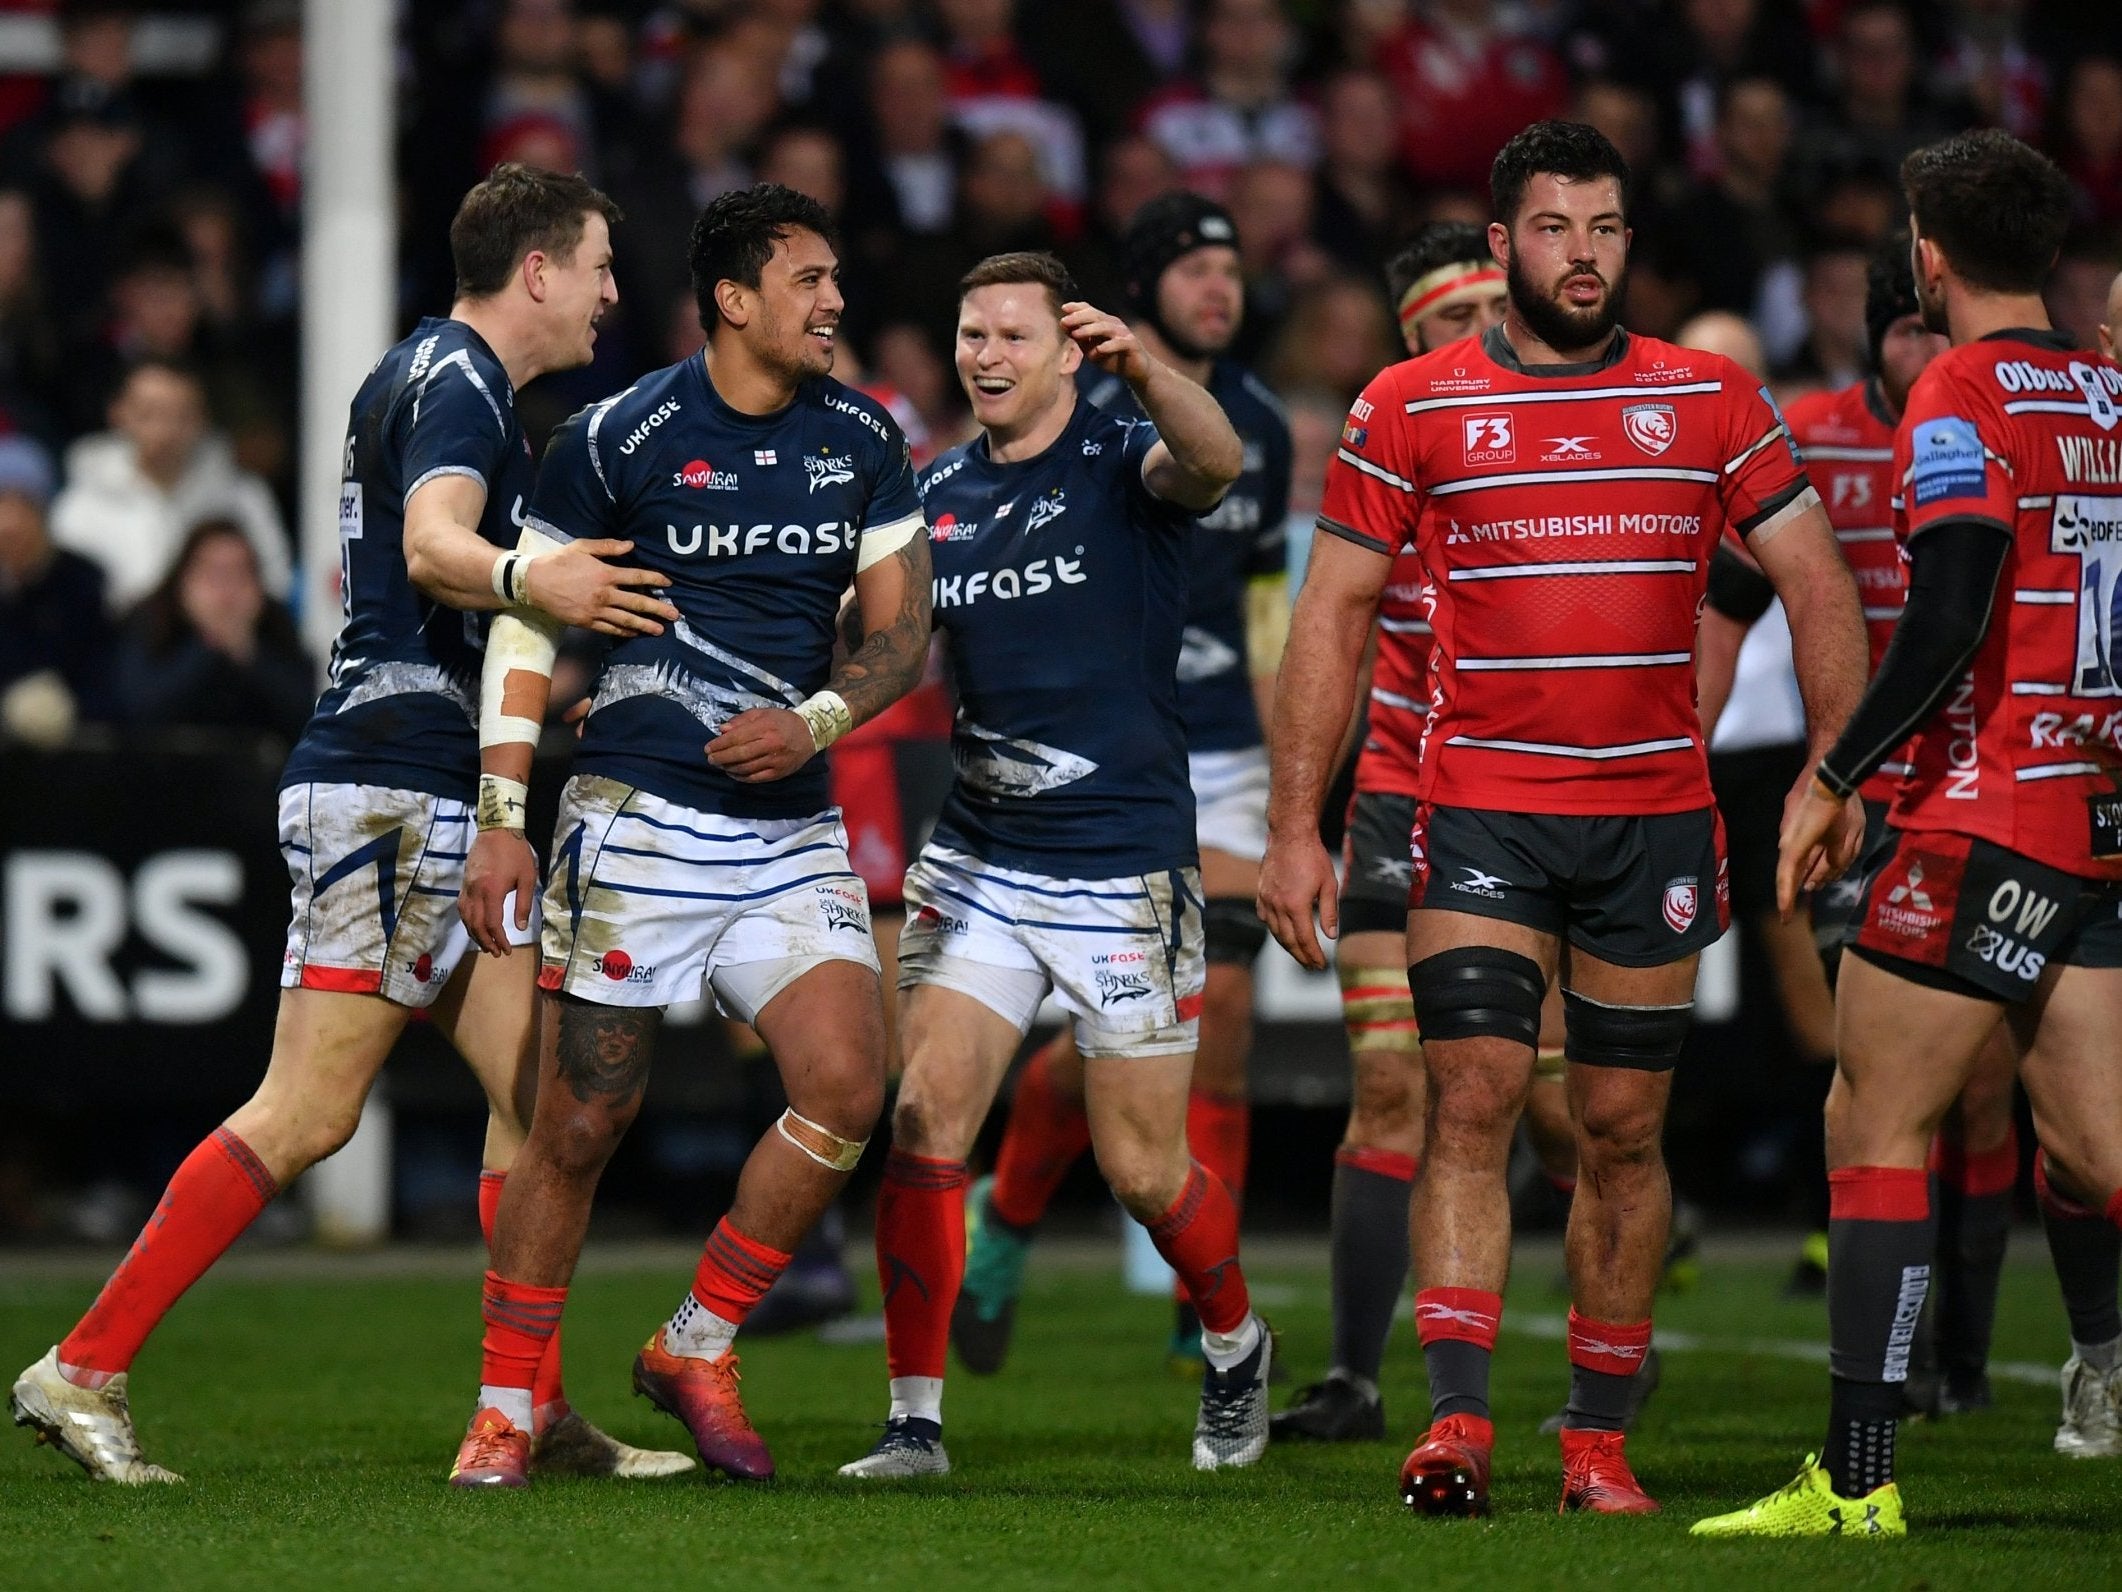 Gloucester slipped up against Sale in their attempt to chase down the top two in the Premiership